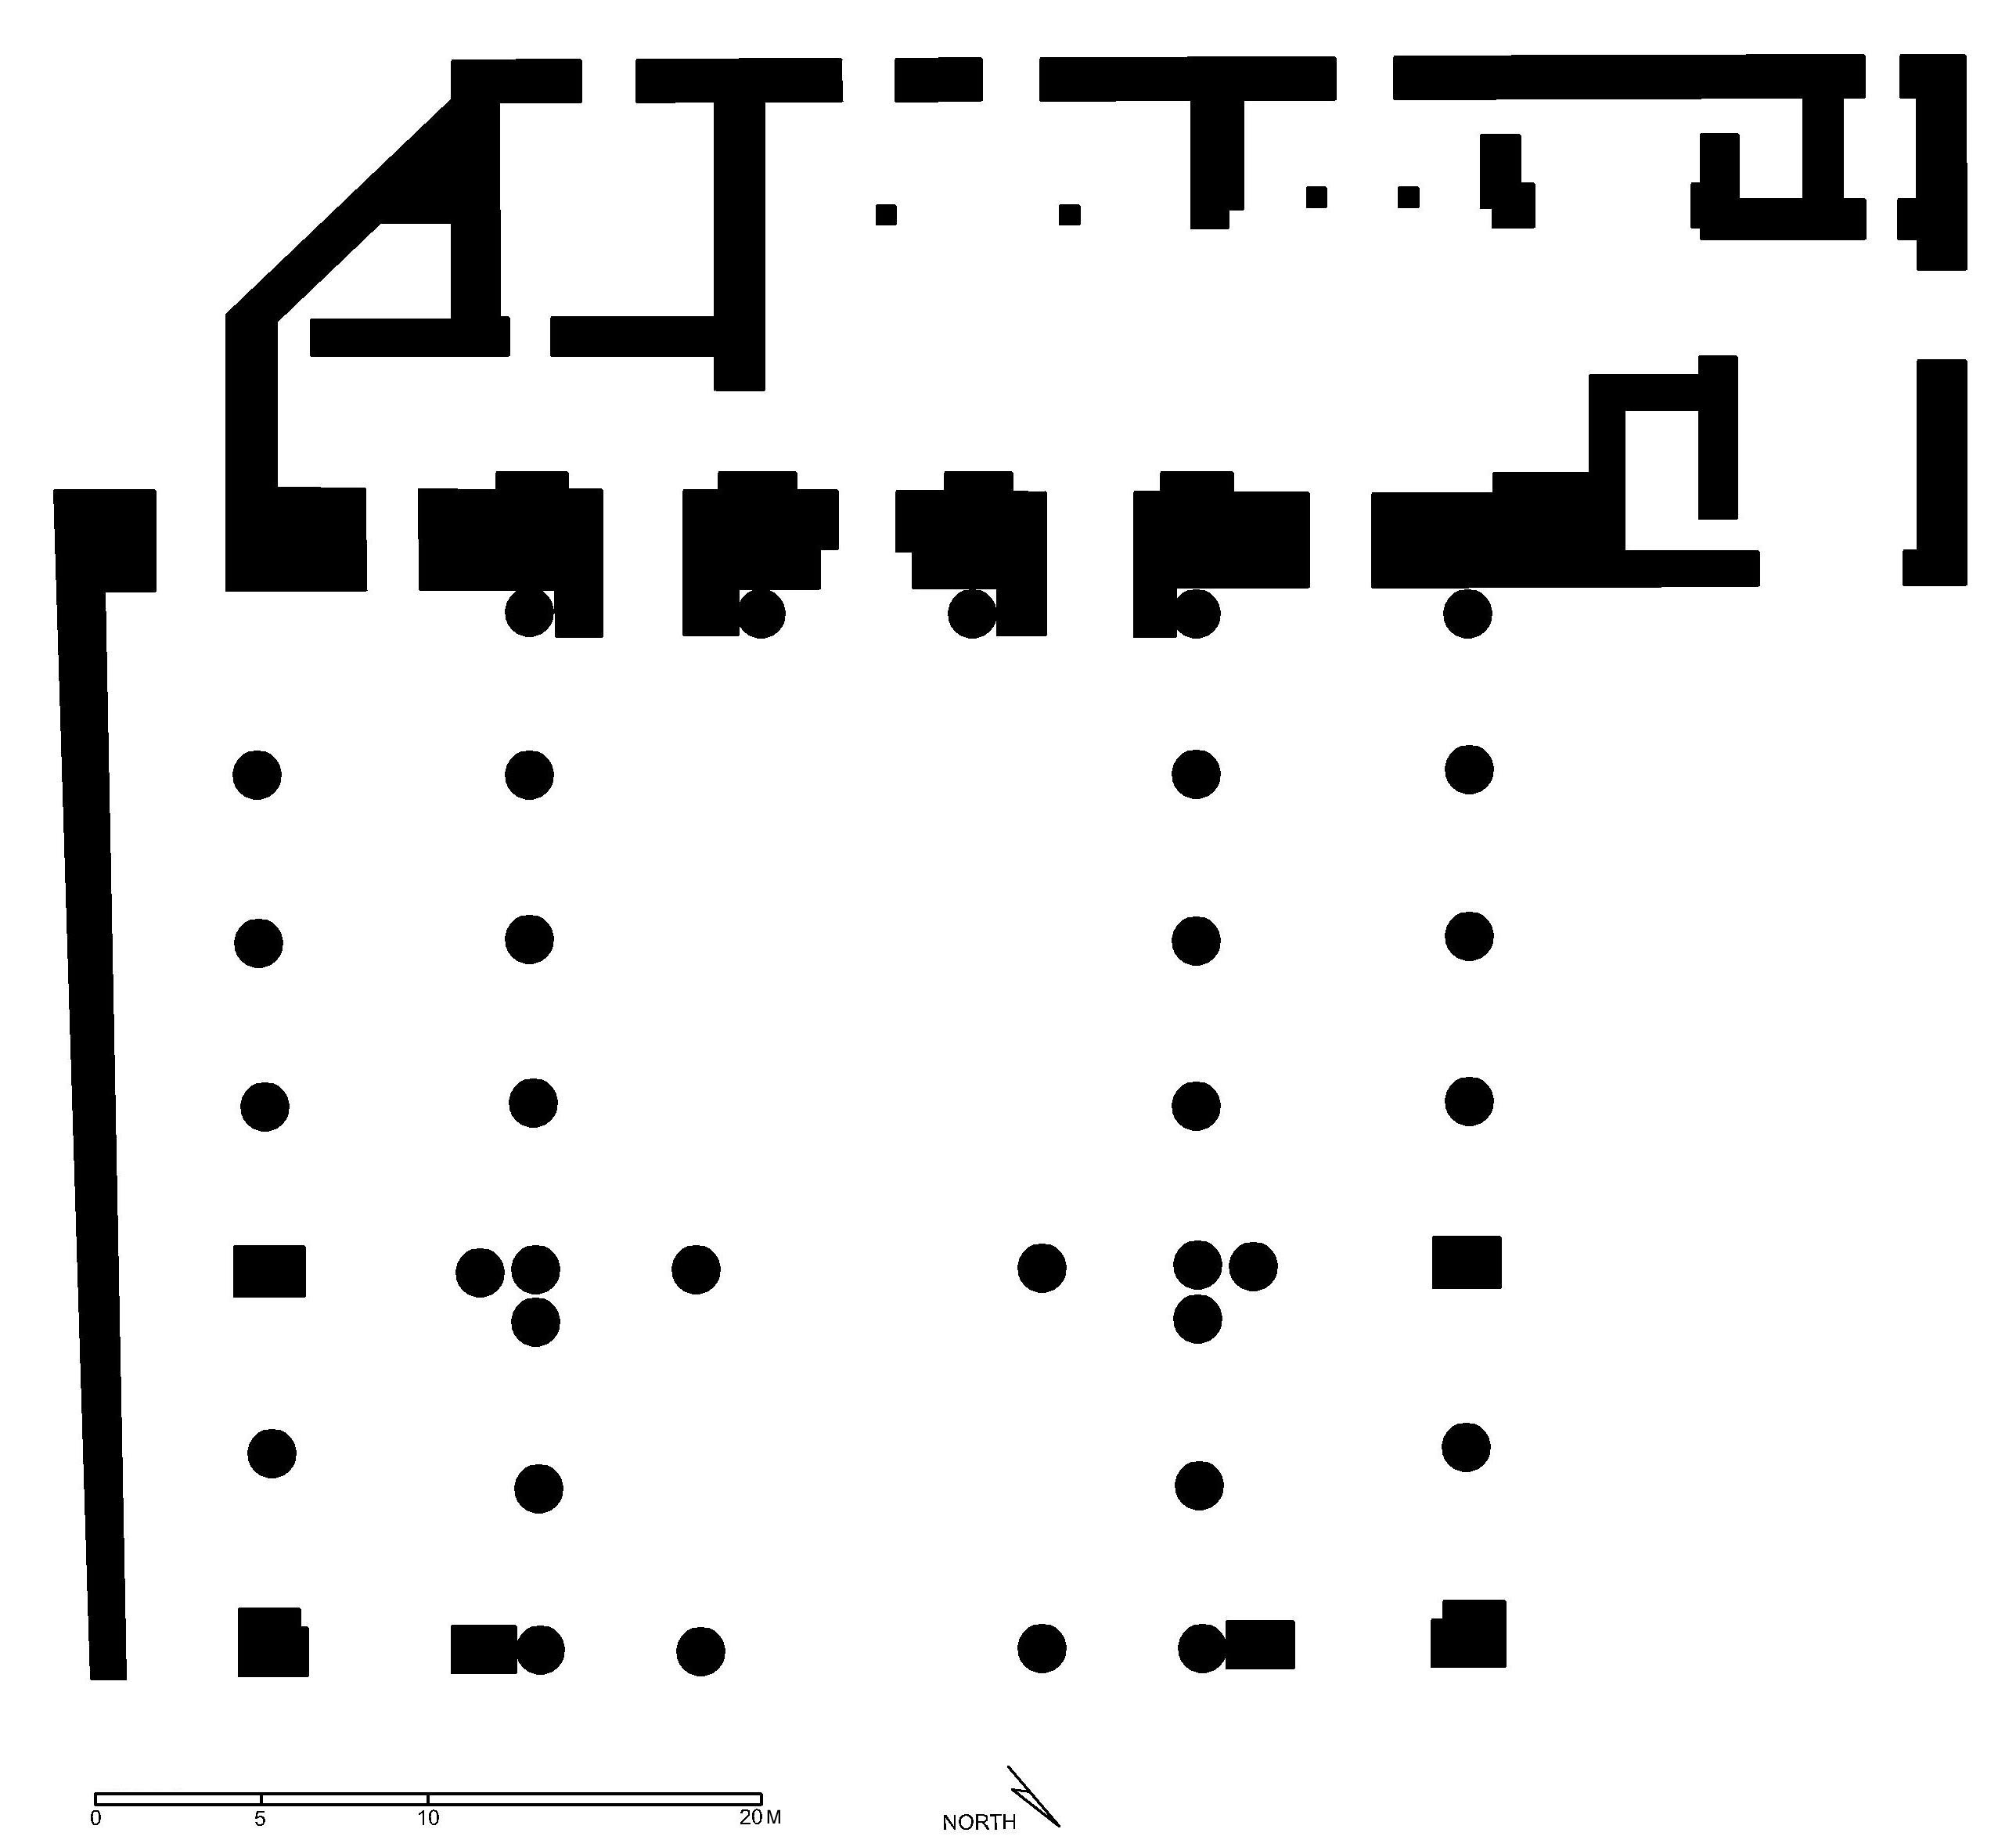 Floor plan of iwan added by Nasr al-Din in 1333 to serve as Audience Hall (after Meinecke)